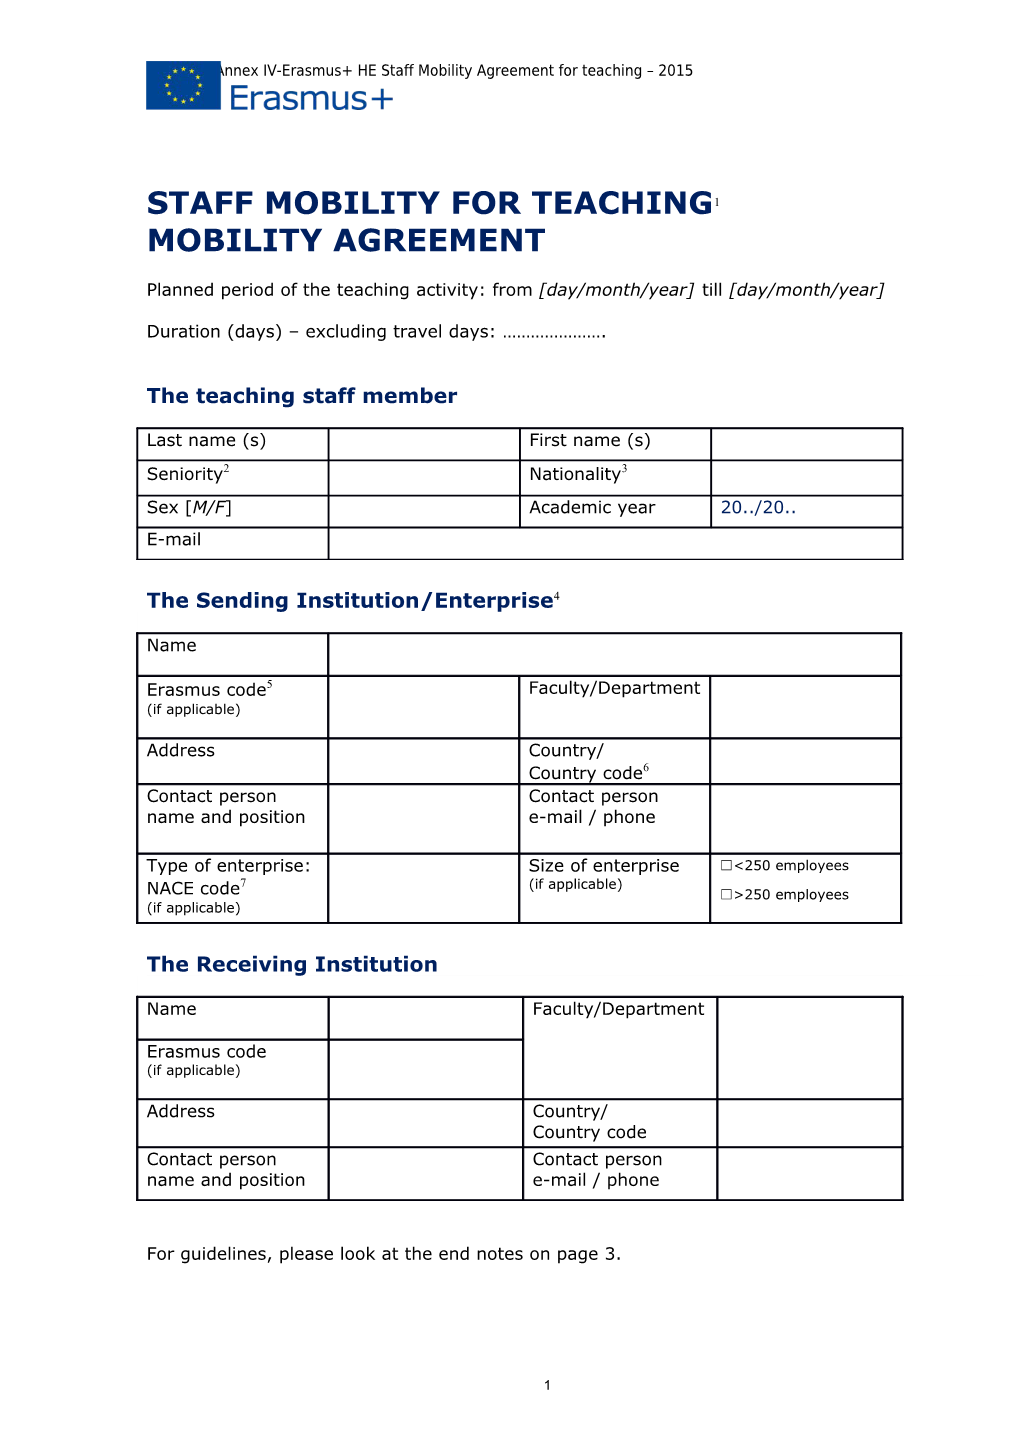 Gfna-II-C-Annex IV-Erasmus+ HE Staff Mobility Agreement for Teaching 2015